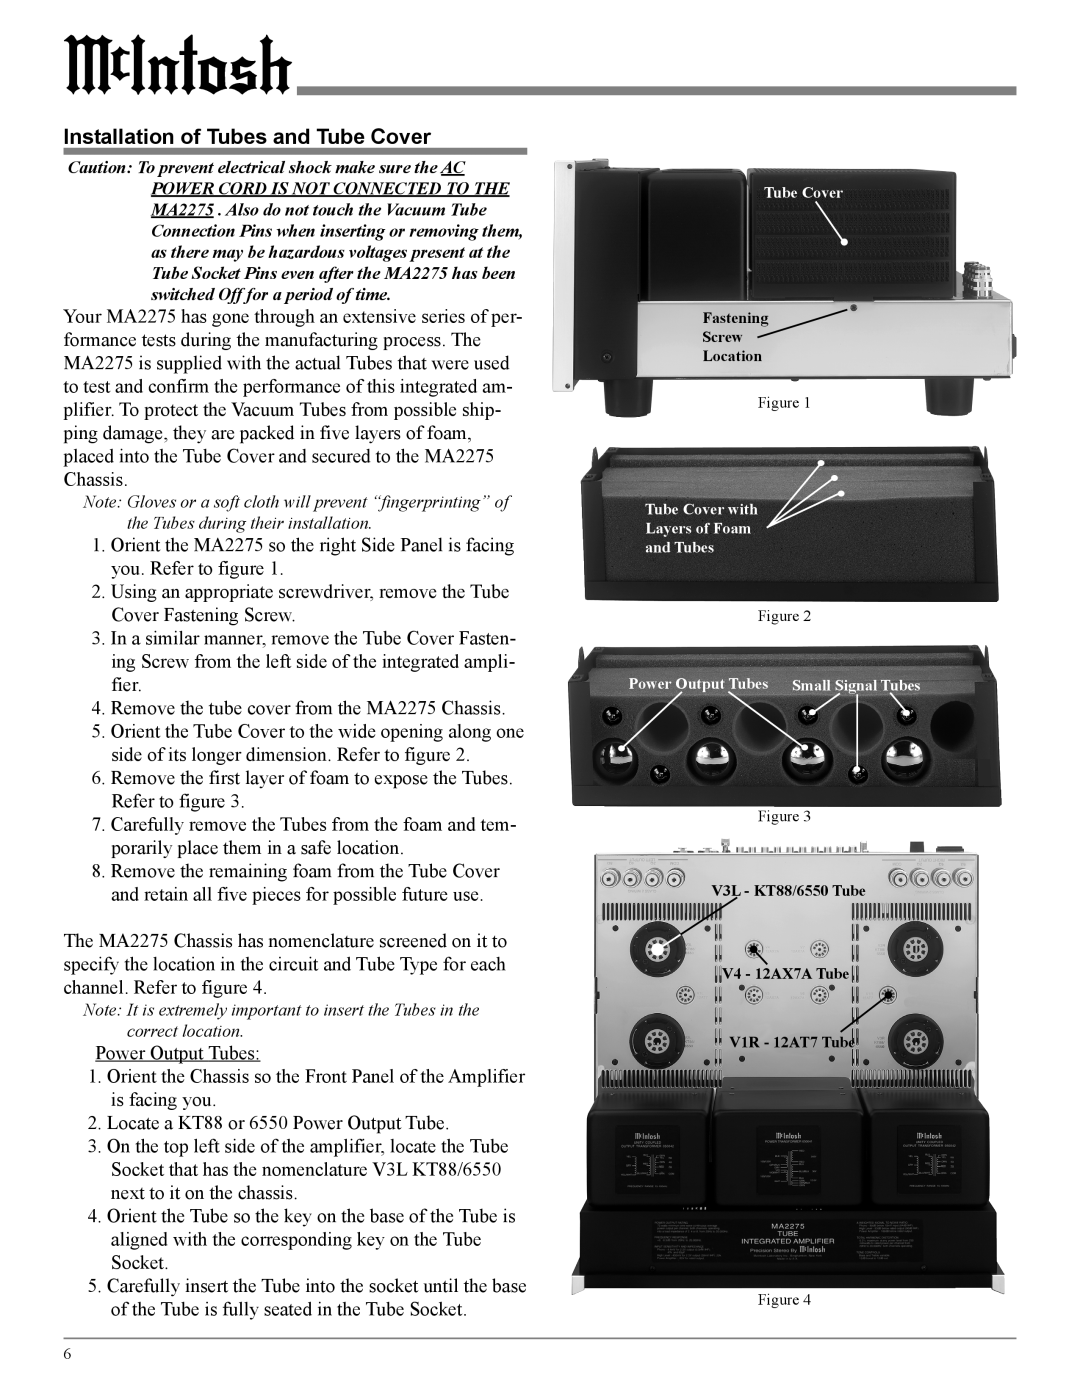 McIntosh MA2275 owner manual Installation of Tubes and Tube Cover 